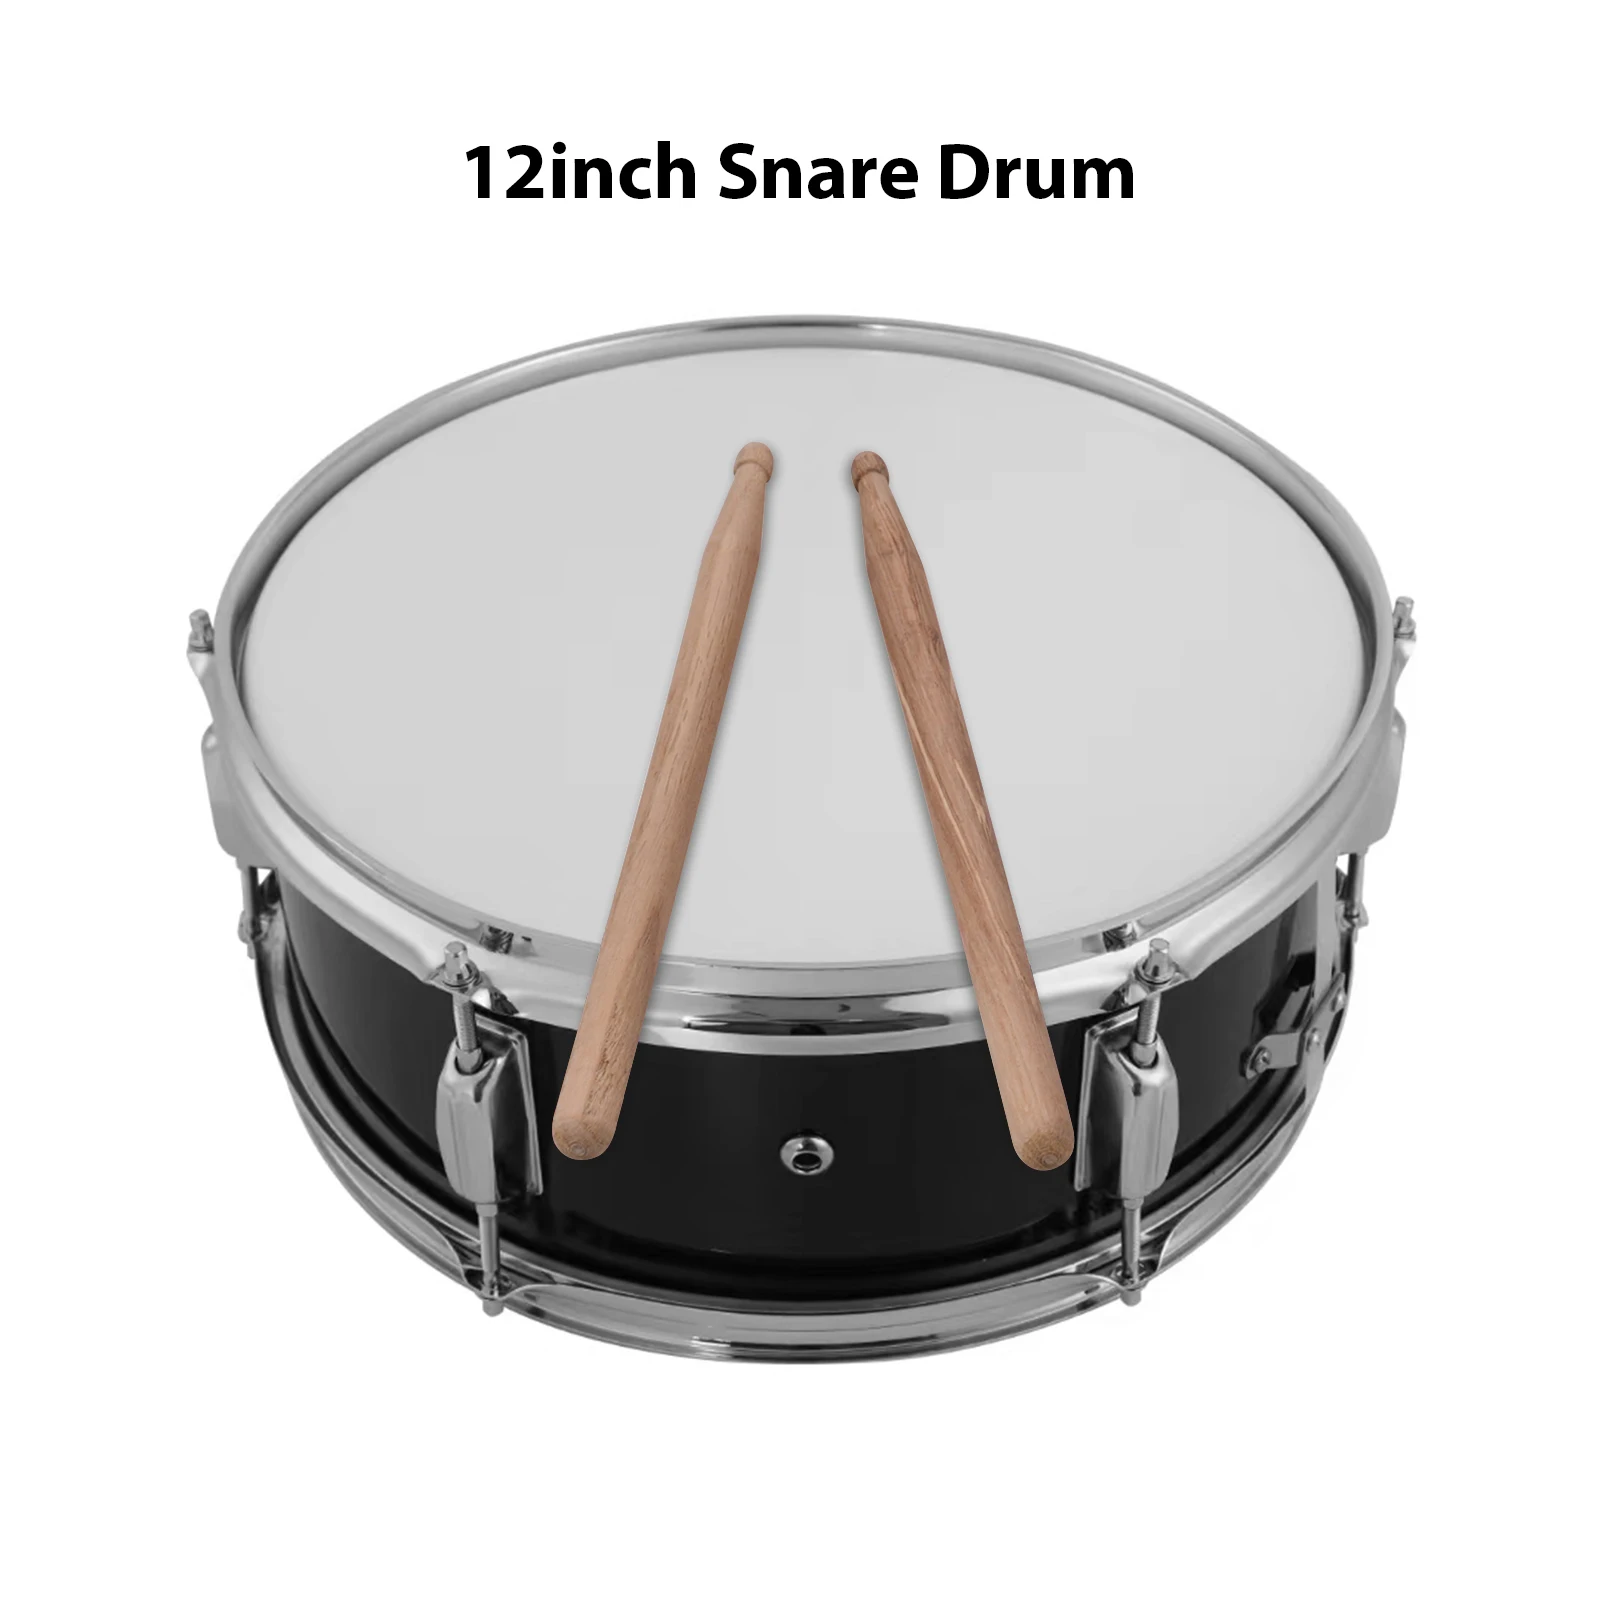 

12inch Snare Drum Portable Snare Drum Set with Drumsticks Shoulder Strap Drum Key Percussion Instrument for Students Beginners